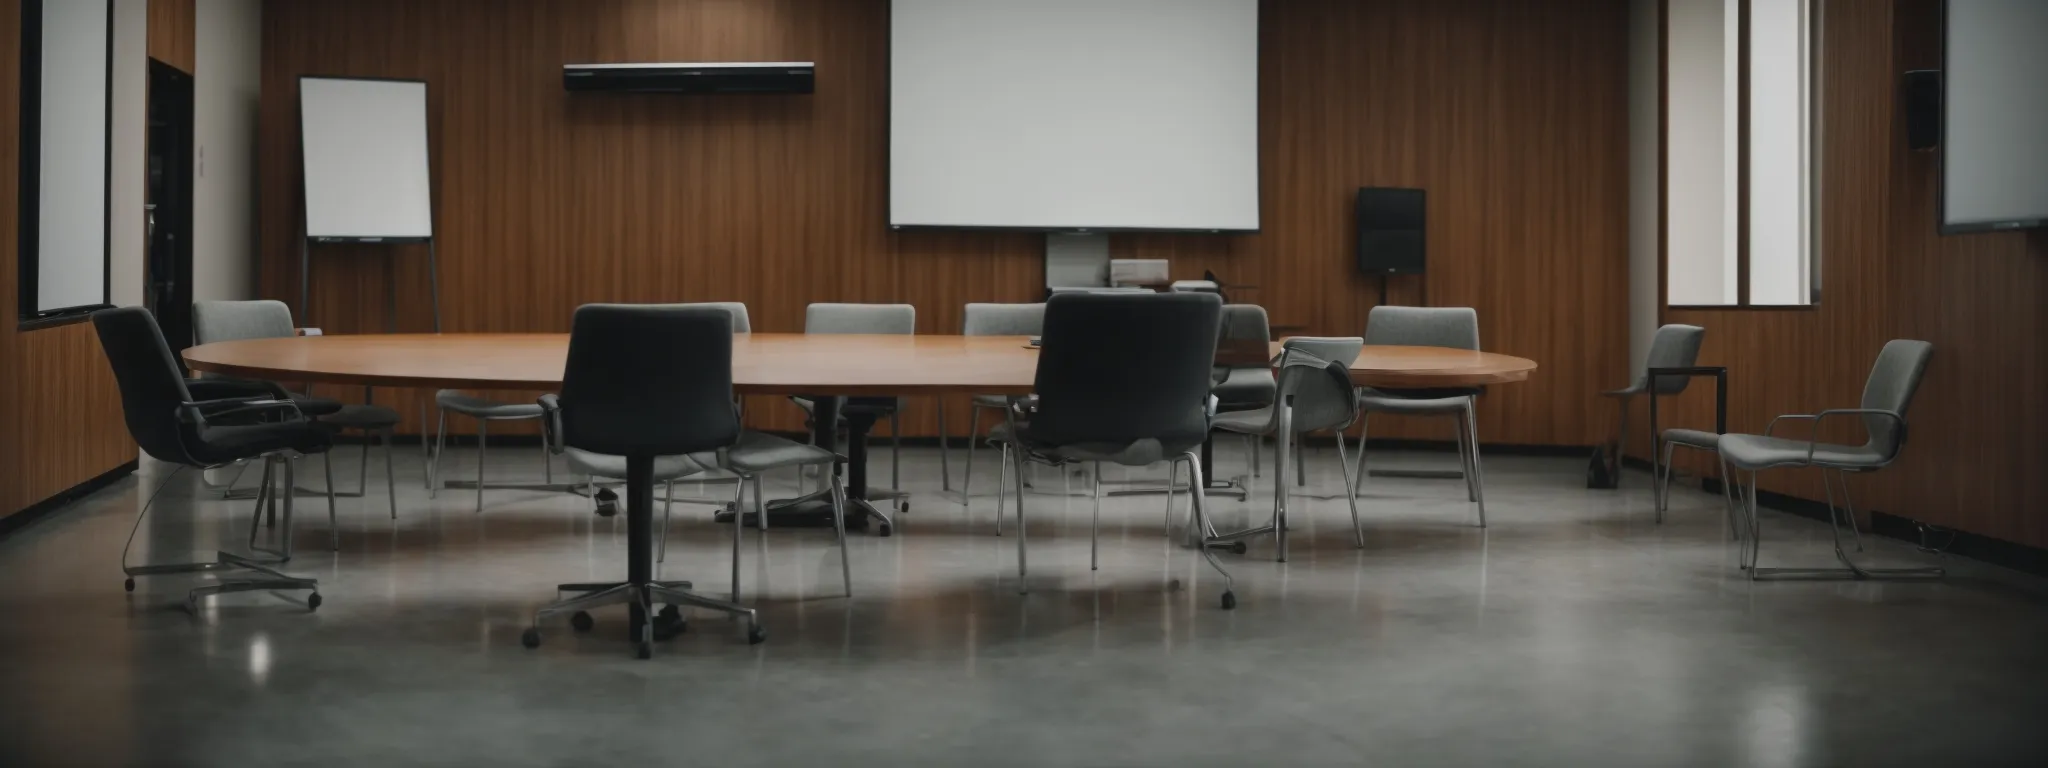 a conference room with a round table, empty chairs, and a whiteboard, awaiting a professional interview session.